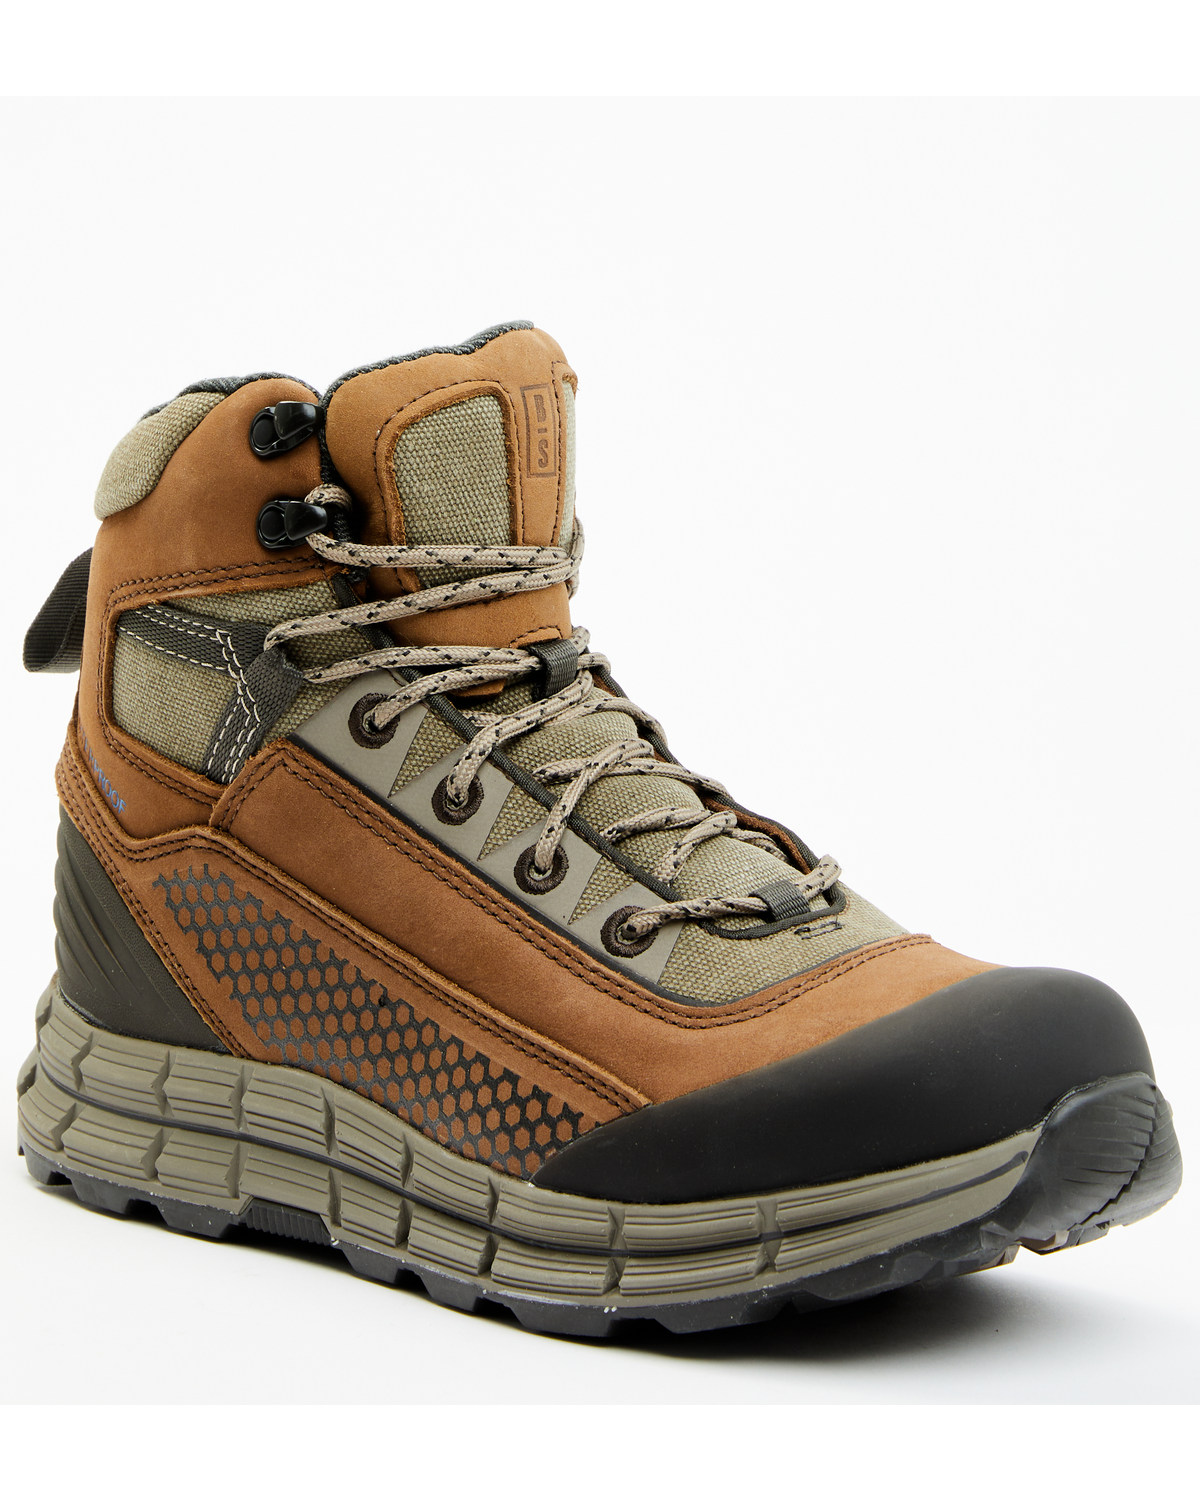 Brothers and Sons Men's 5.5" Waterproof Hiker Work Boots - Soft Toe